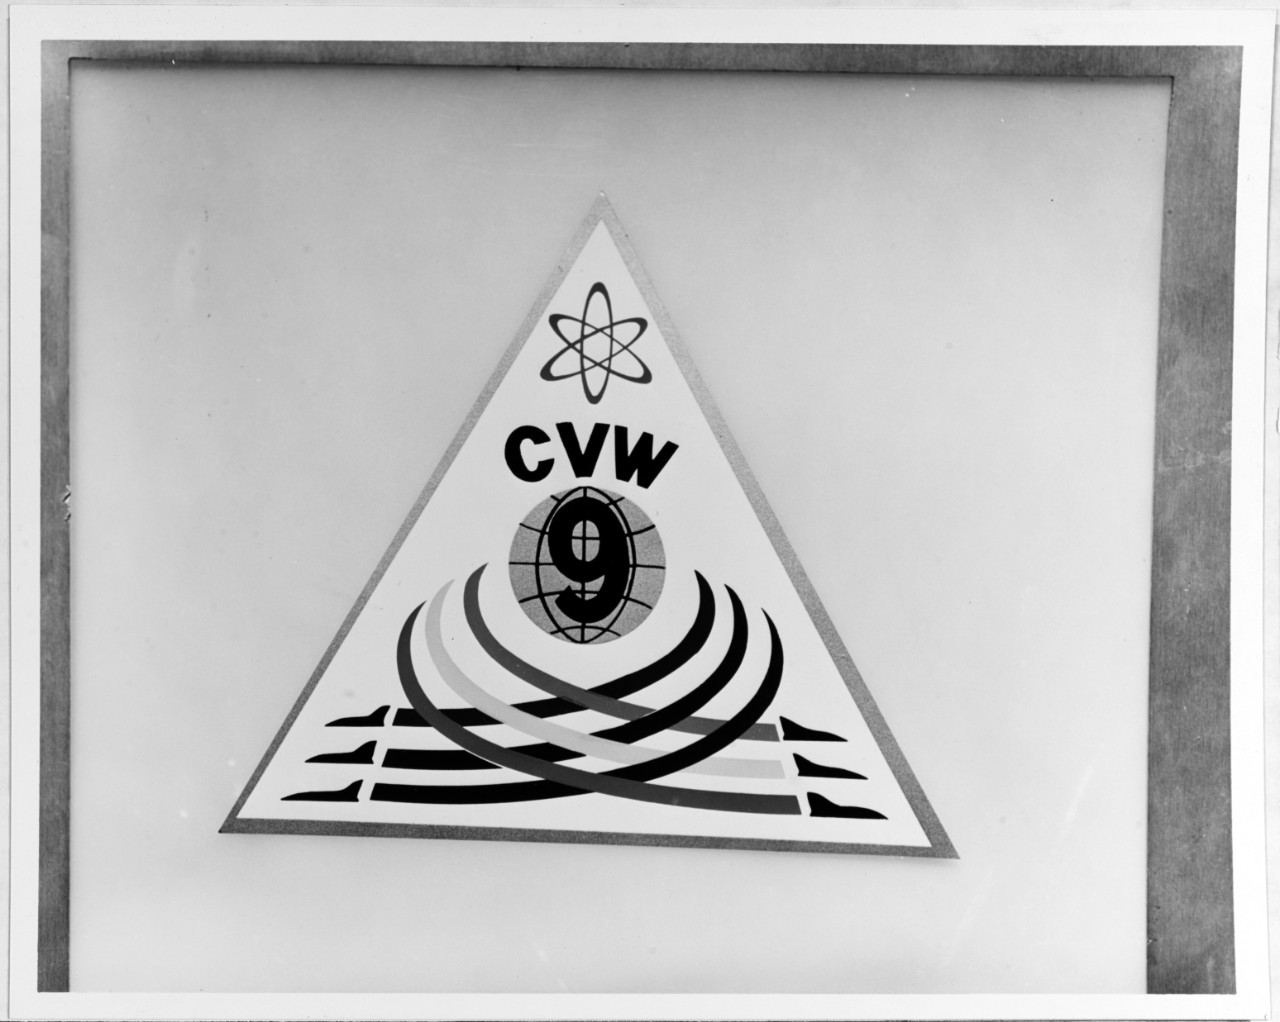 Insignia: Attack Carrier Air Wing Nine (CVW-9)